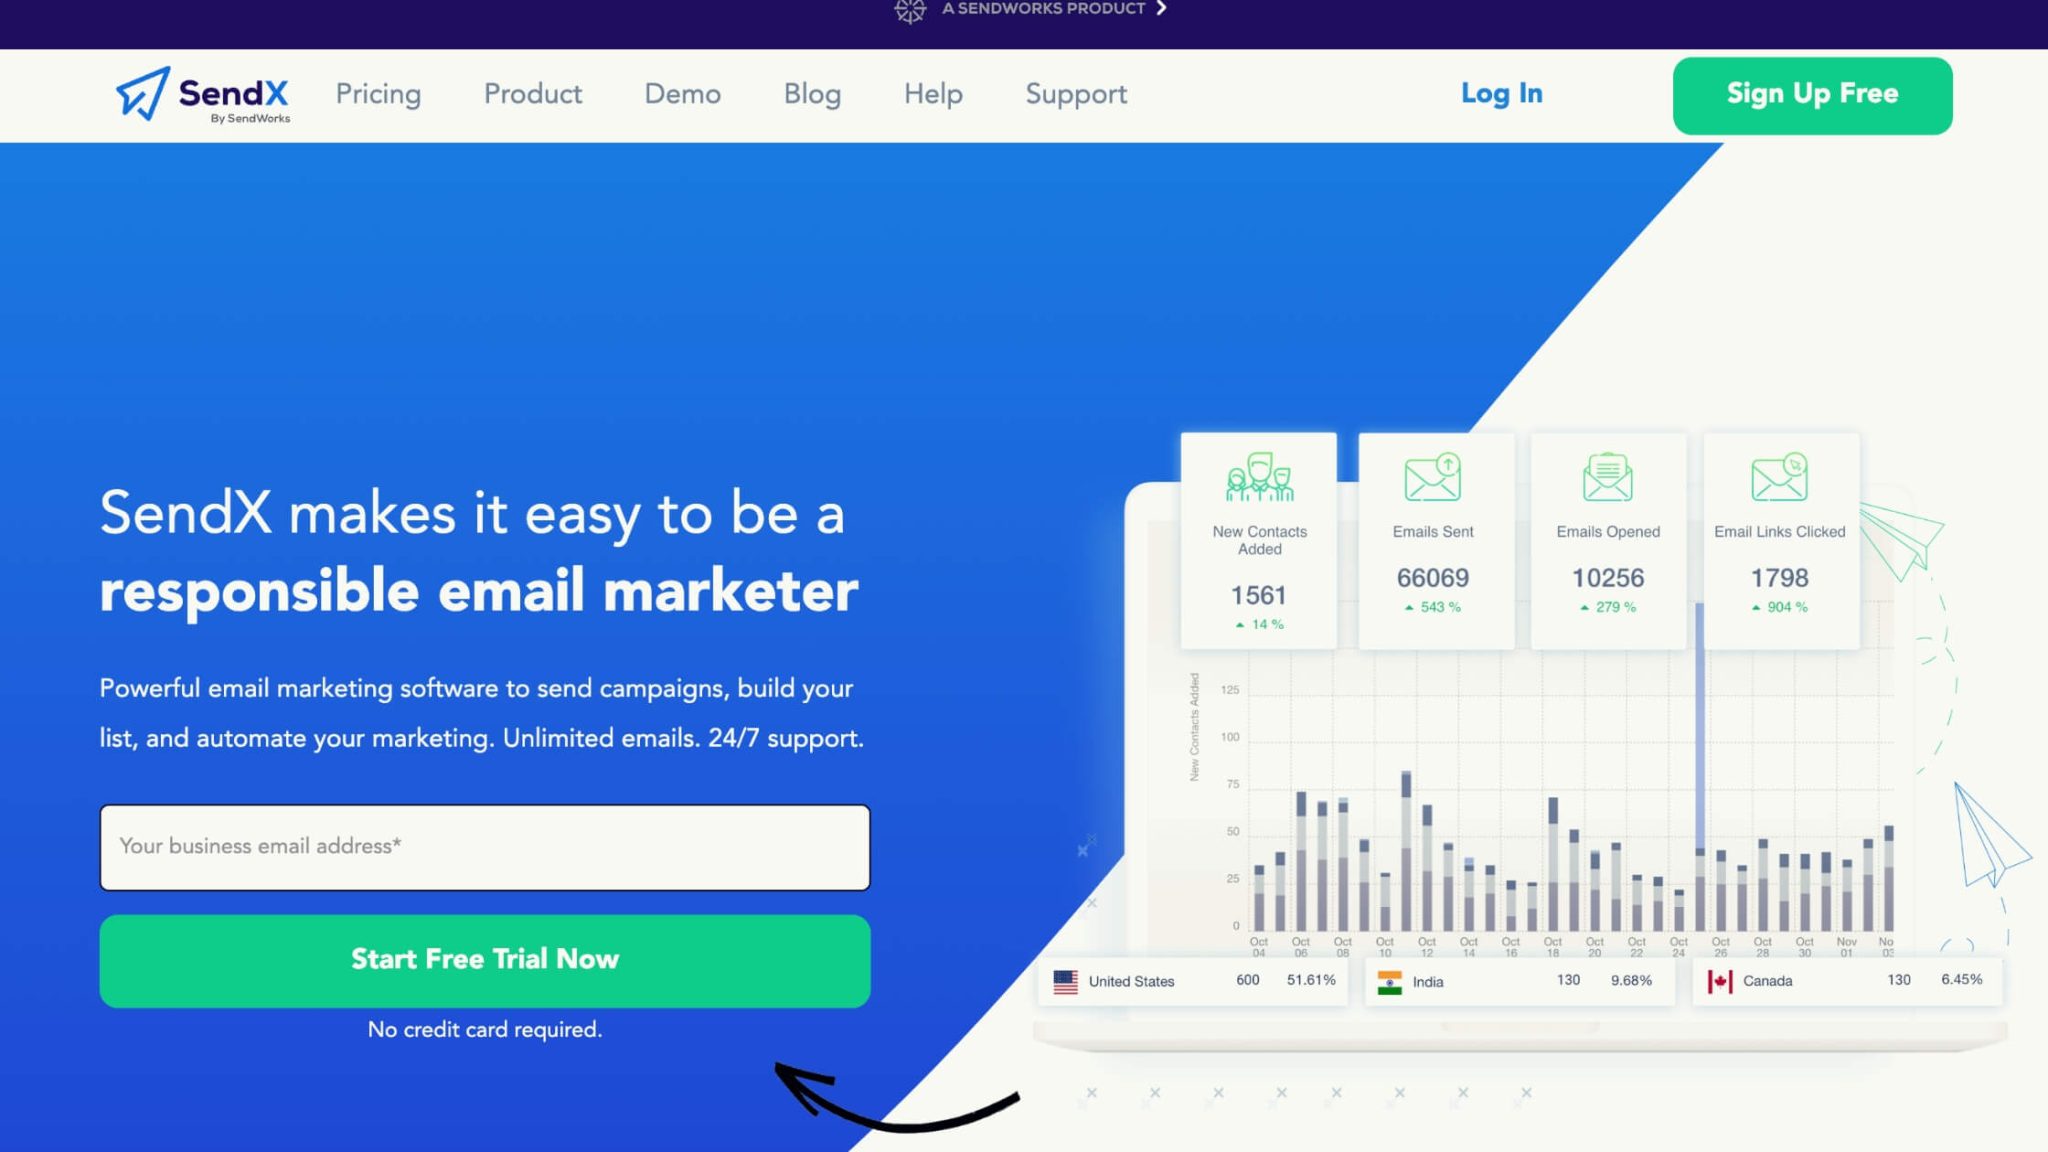 A screenshot from the home page of email marketing service SendX